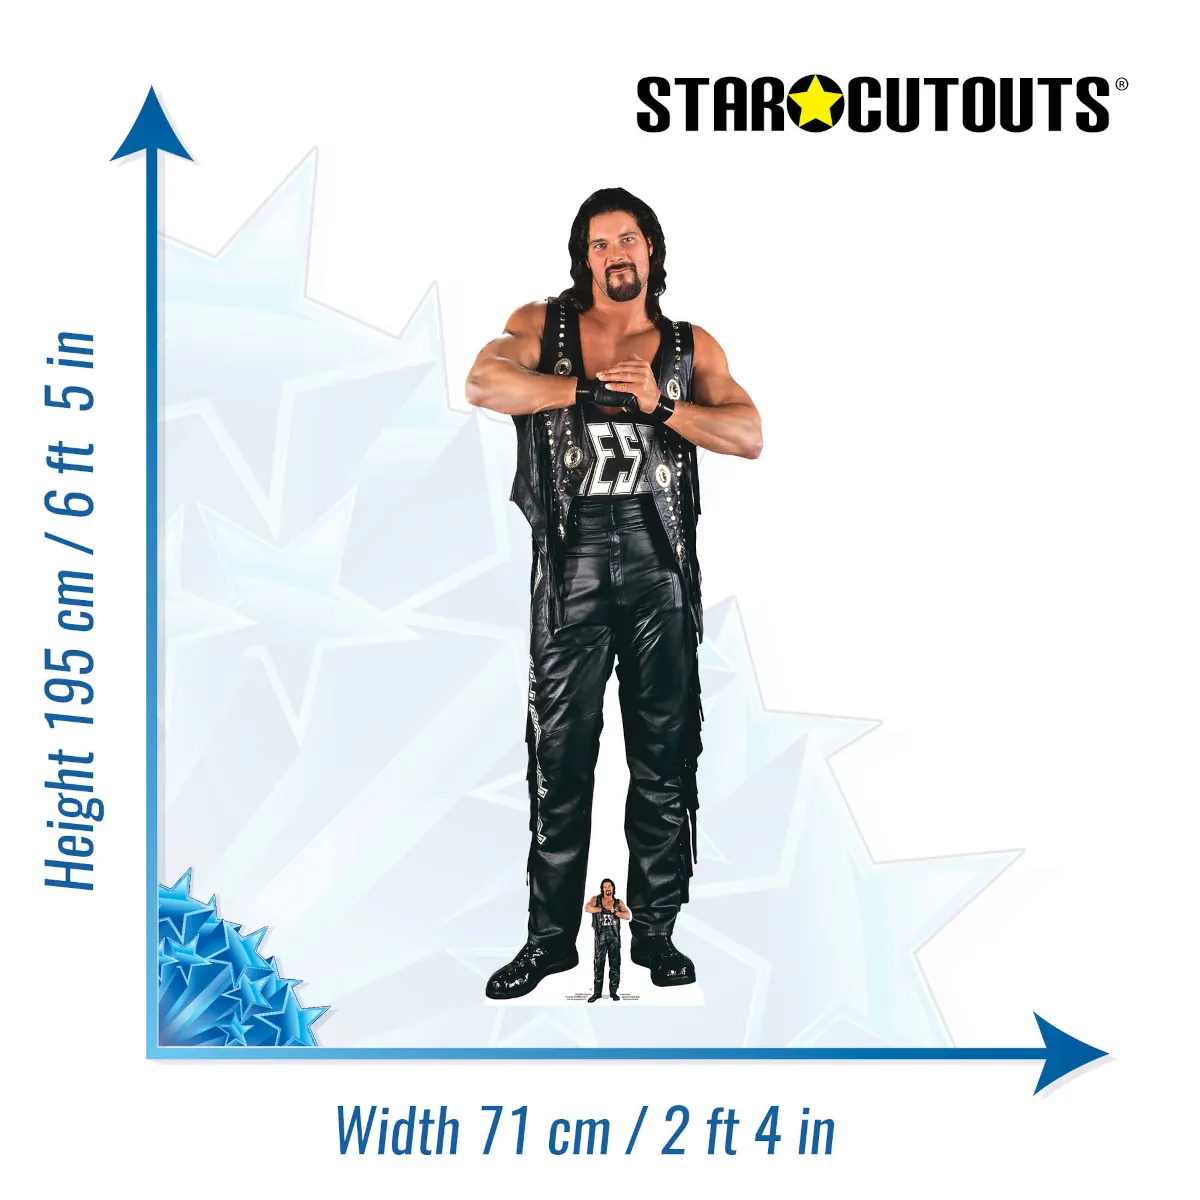 SC4110 Diesel 'Kevin Nash' (WWE) Official Lifesize + Mini Cardboard Cutout Standee Size